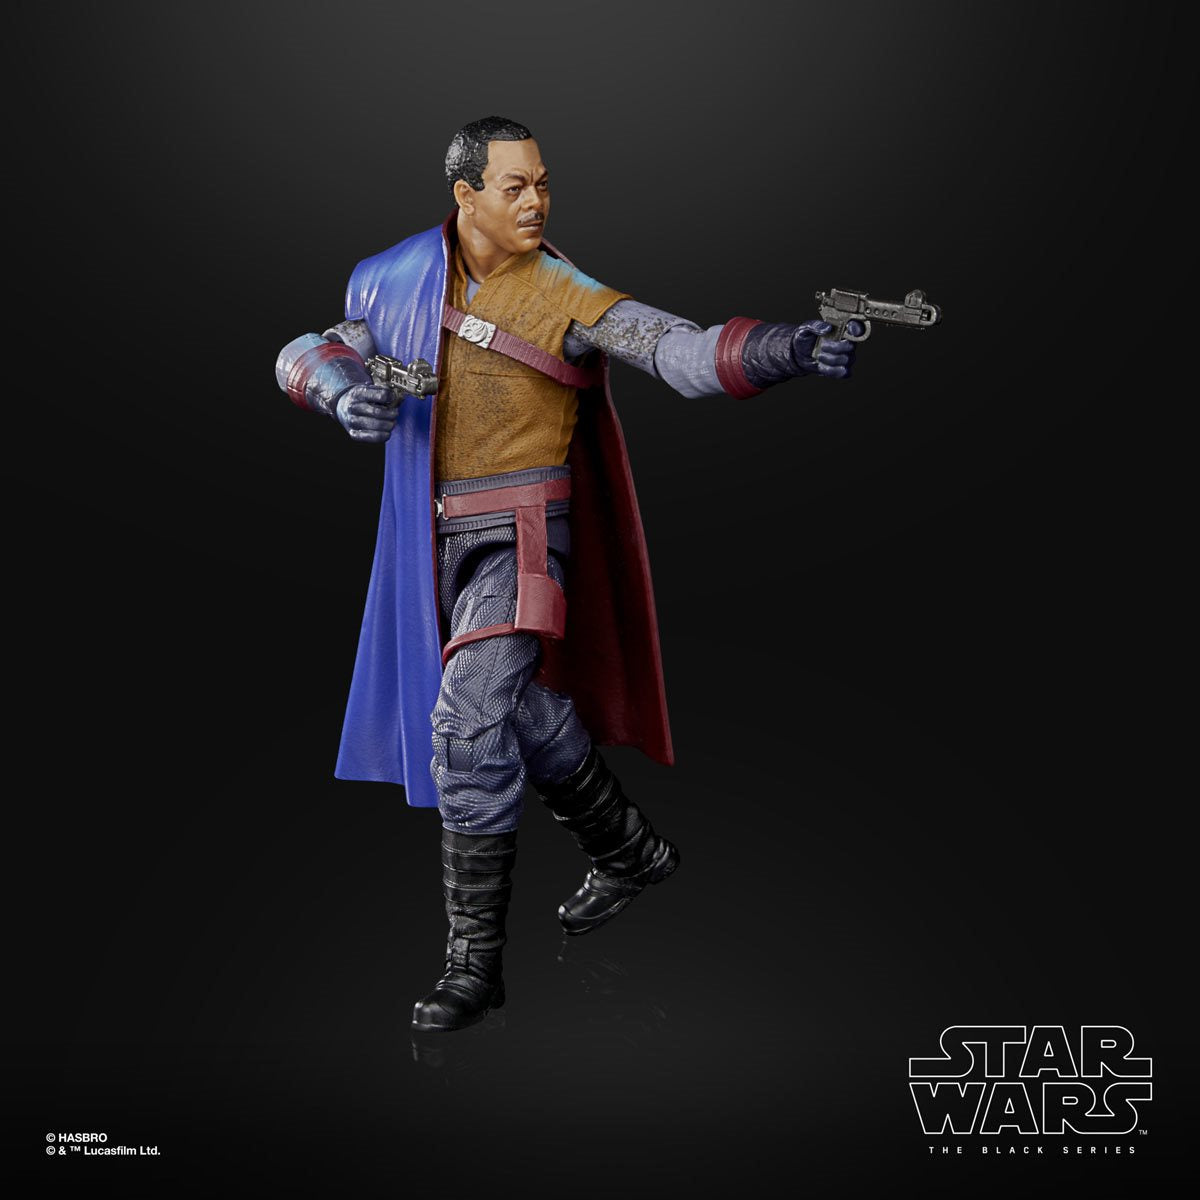 Star Wars The Black Series Credit Collection Greef Karga Toy 15-cm-Scale The Mandalorian Collectible Figure